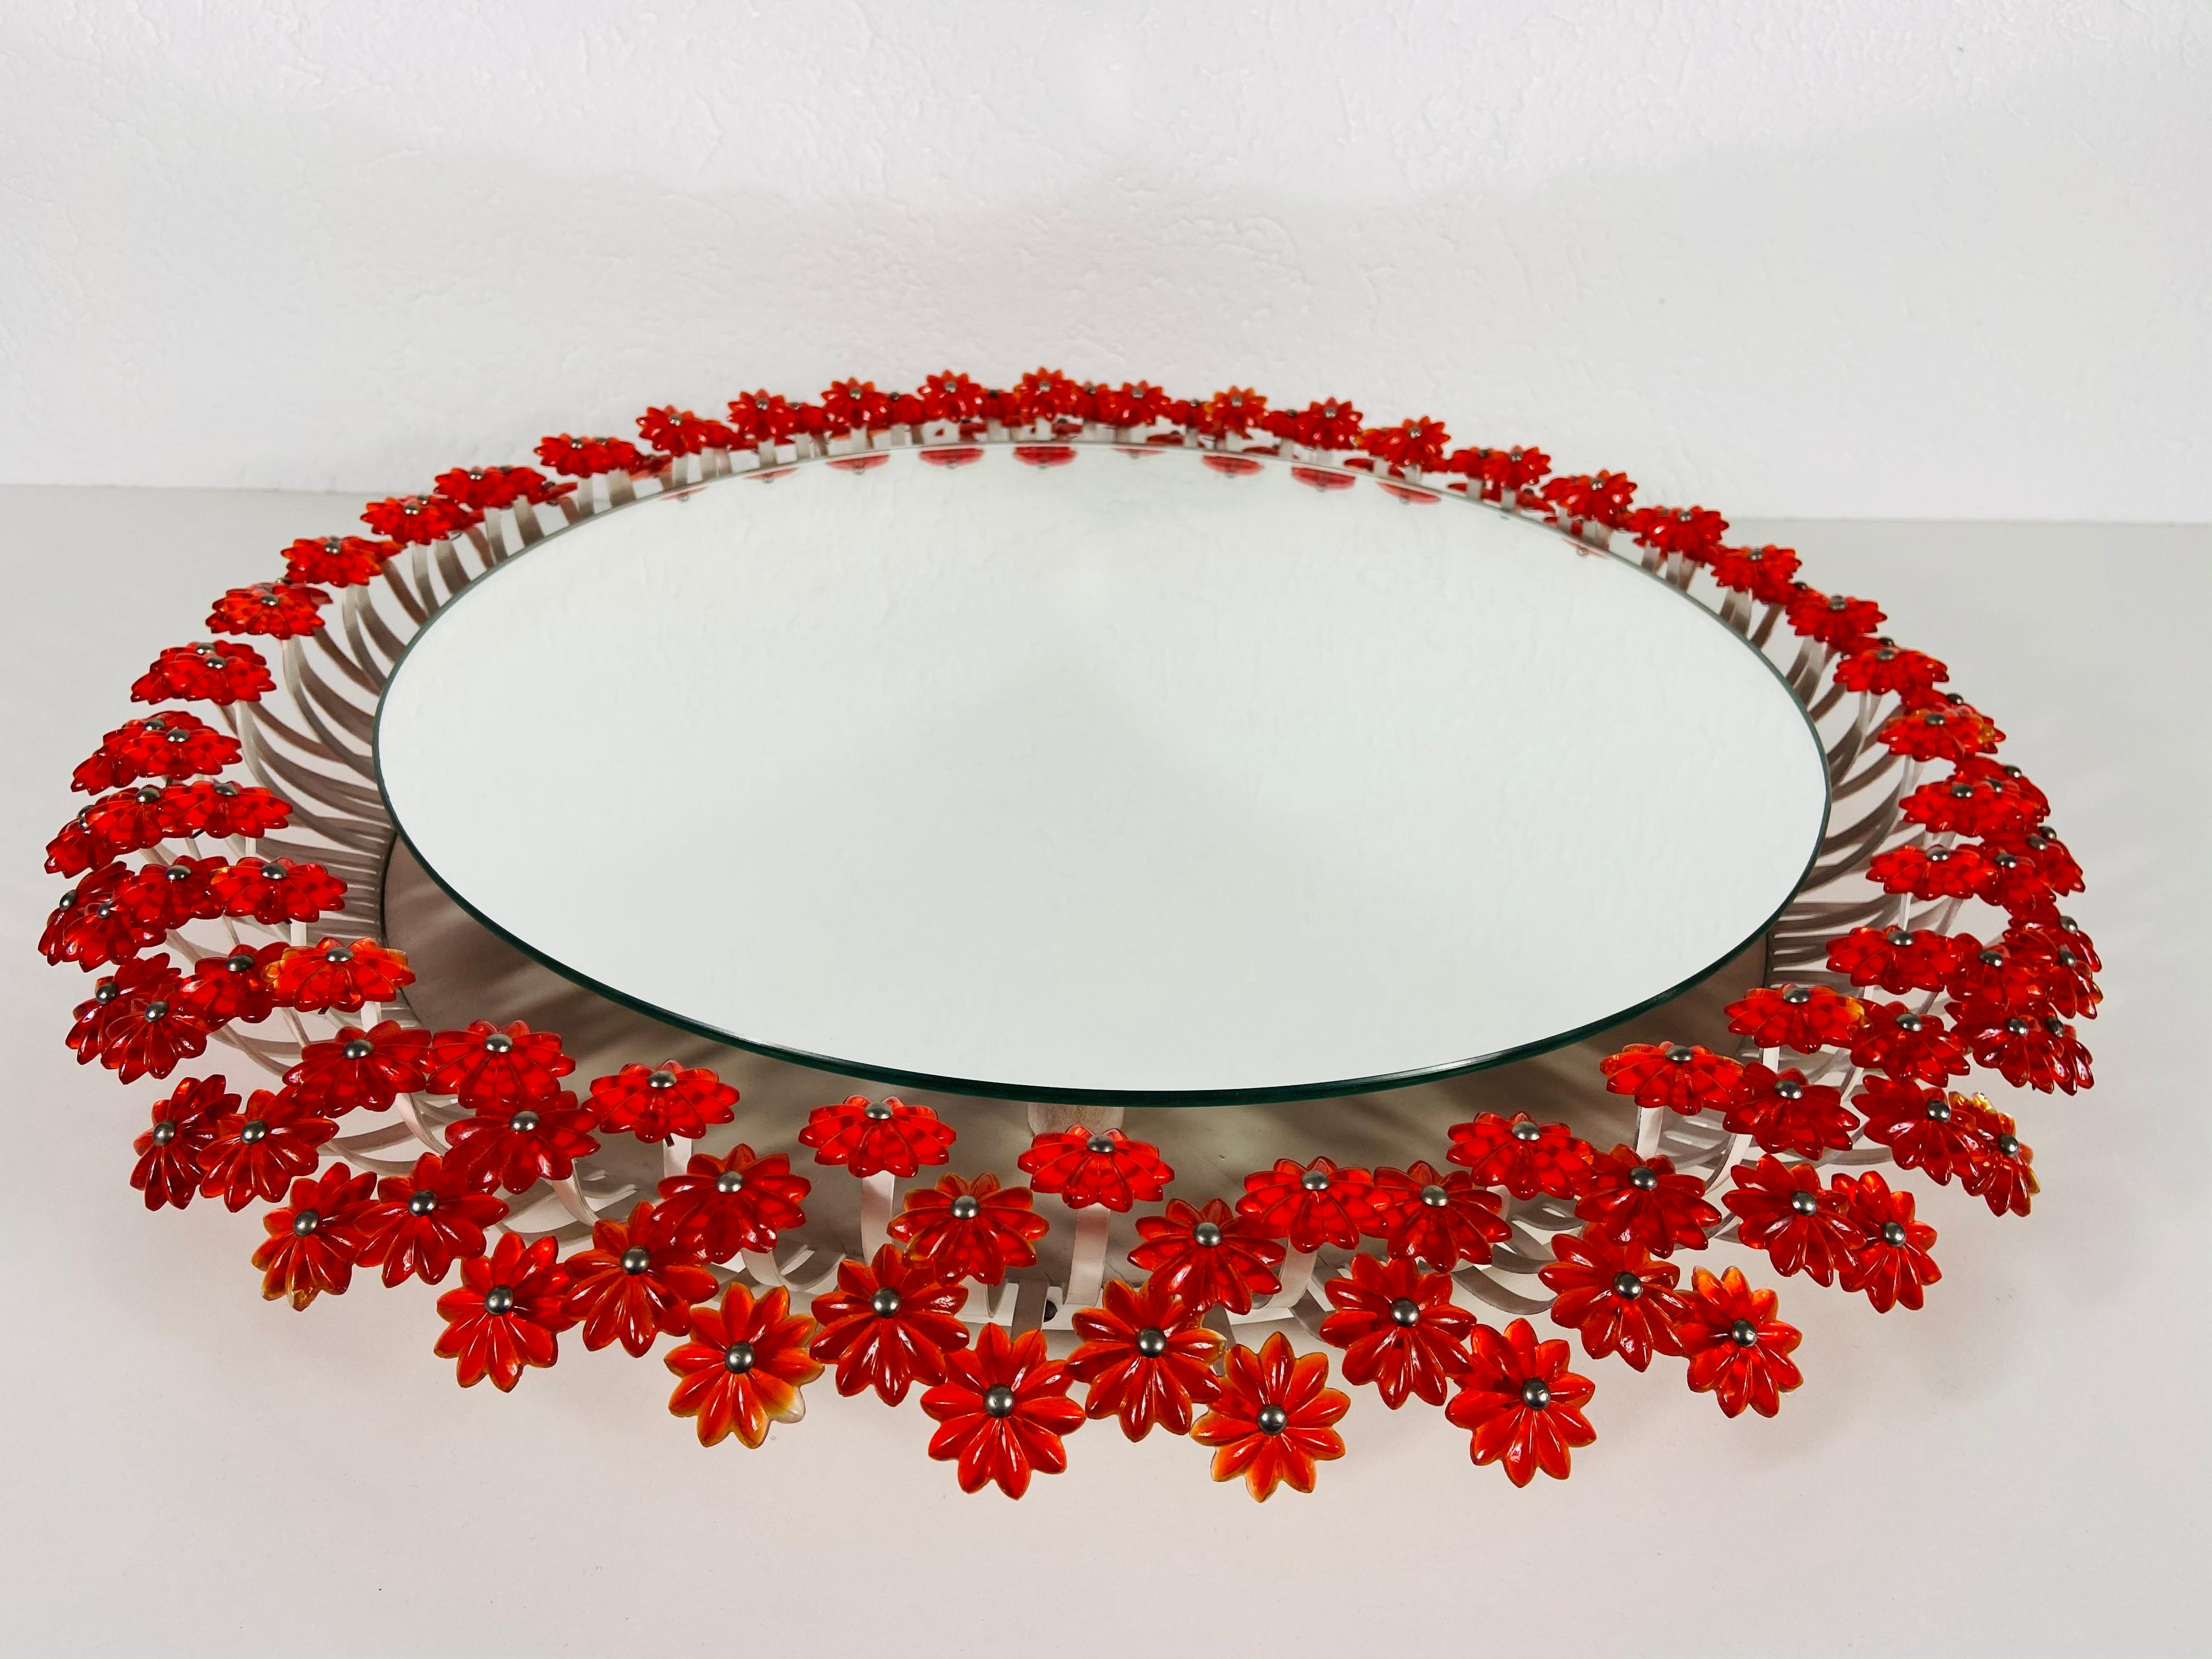 An illuminated wall mirror from the 1960s made in Austria. It was designed by Emil Stejnar for Rupert Nikoll. The mirror has a round design with beautiful orange/red acrylic flowers. The mirror is in a very good vintage 

Measures: 

Total